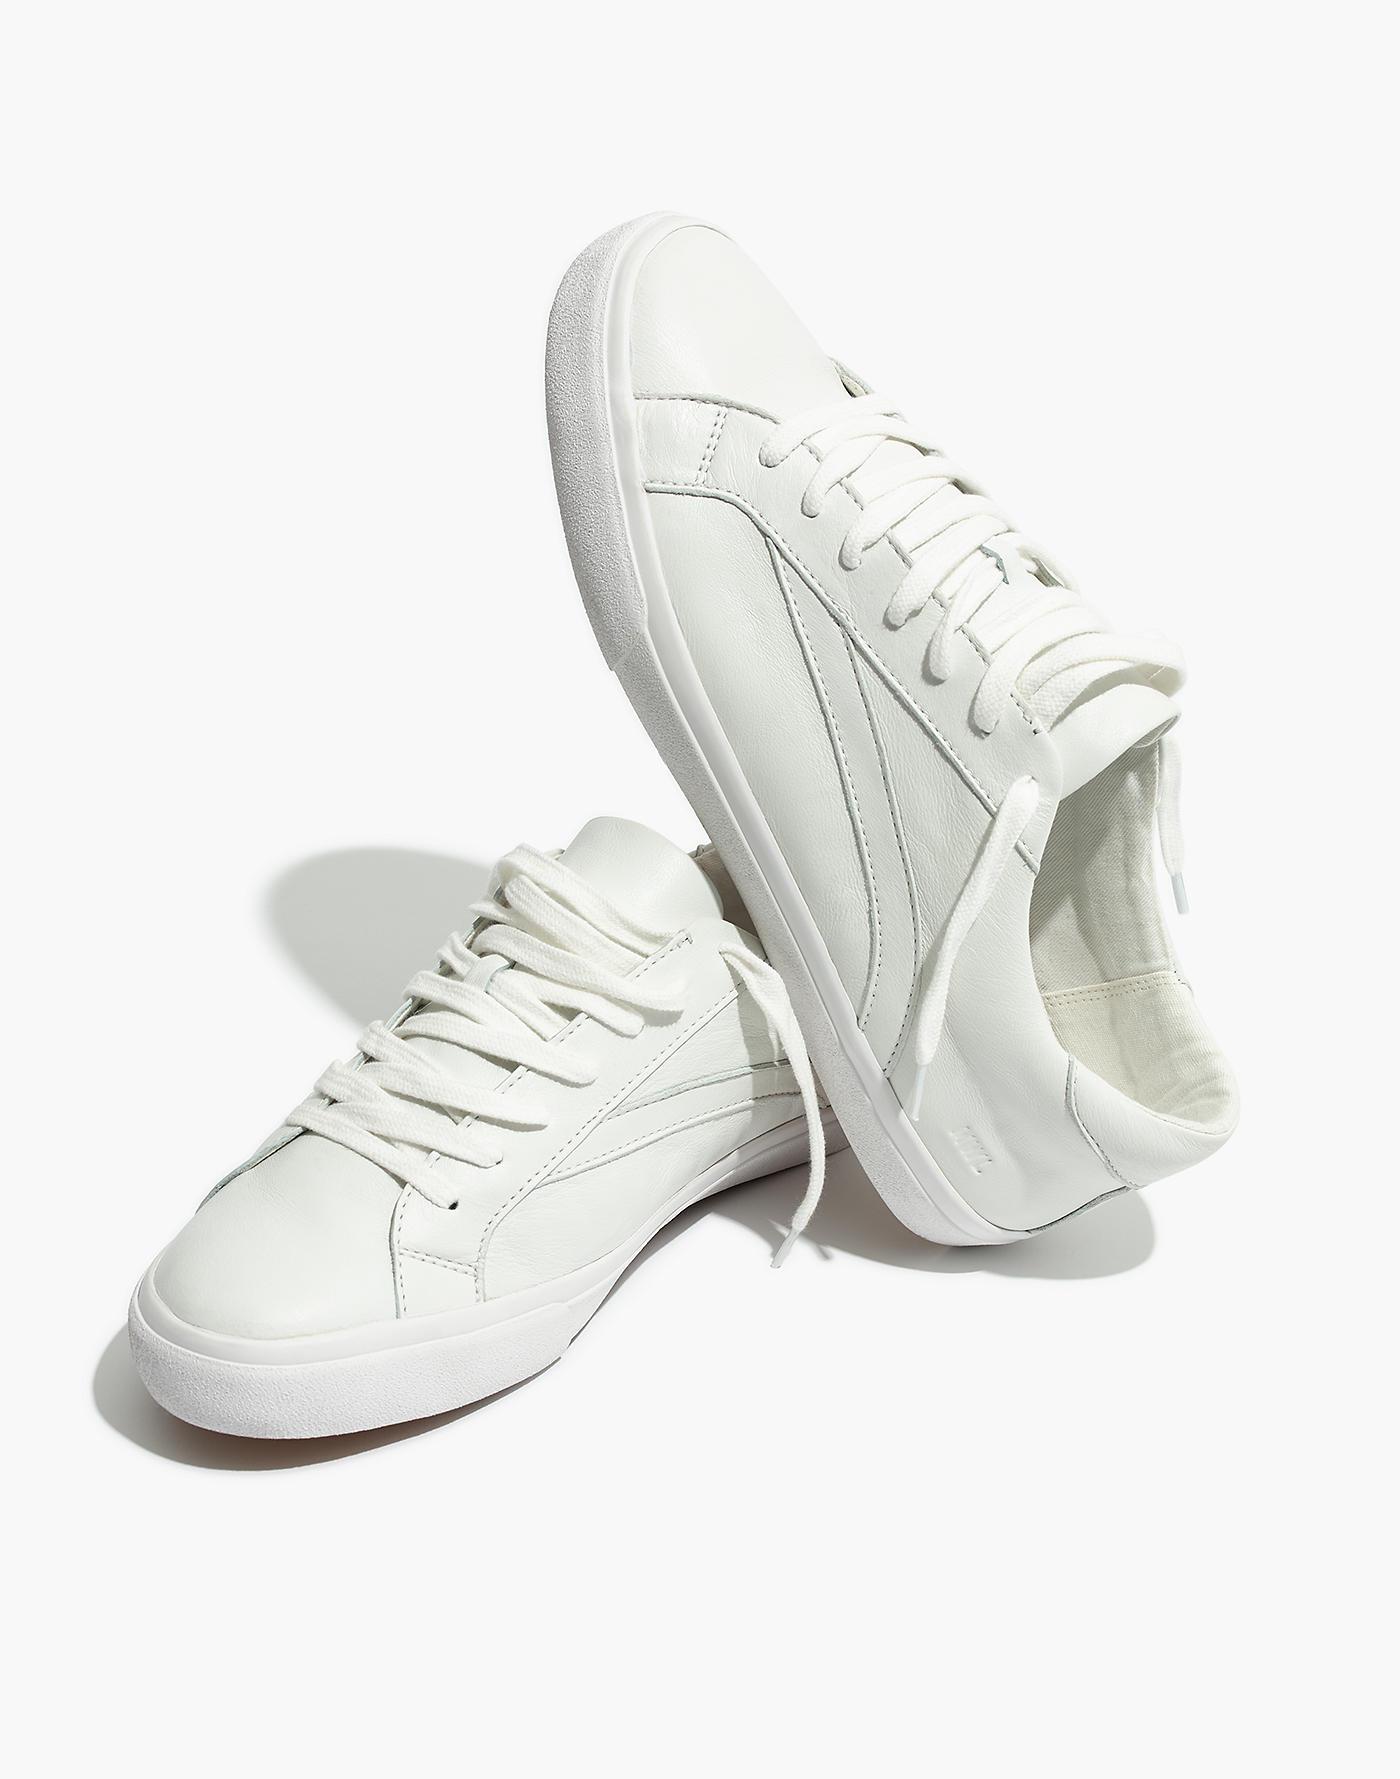 Madewell Men's Sidewalk Lowtop Sneakers In Leather in Pale Parchment